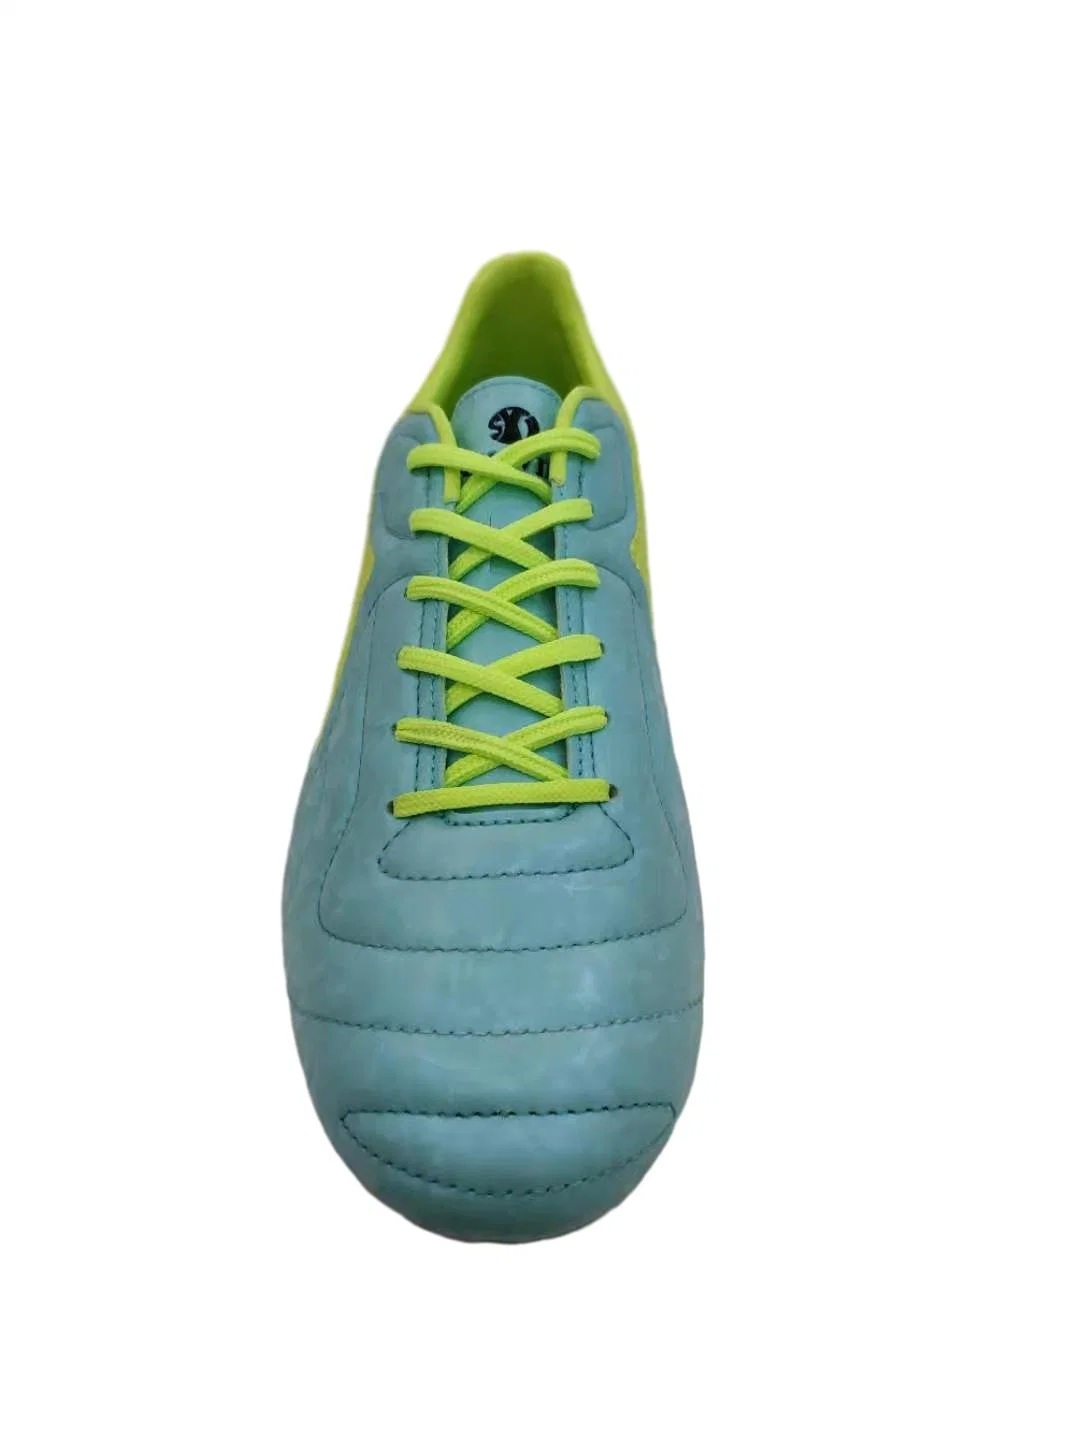 Men Athletic Sport Shoes Outdoor Soccer Shoes Football Shoes